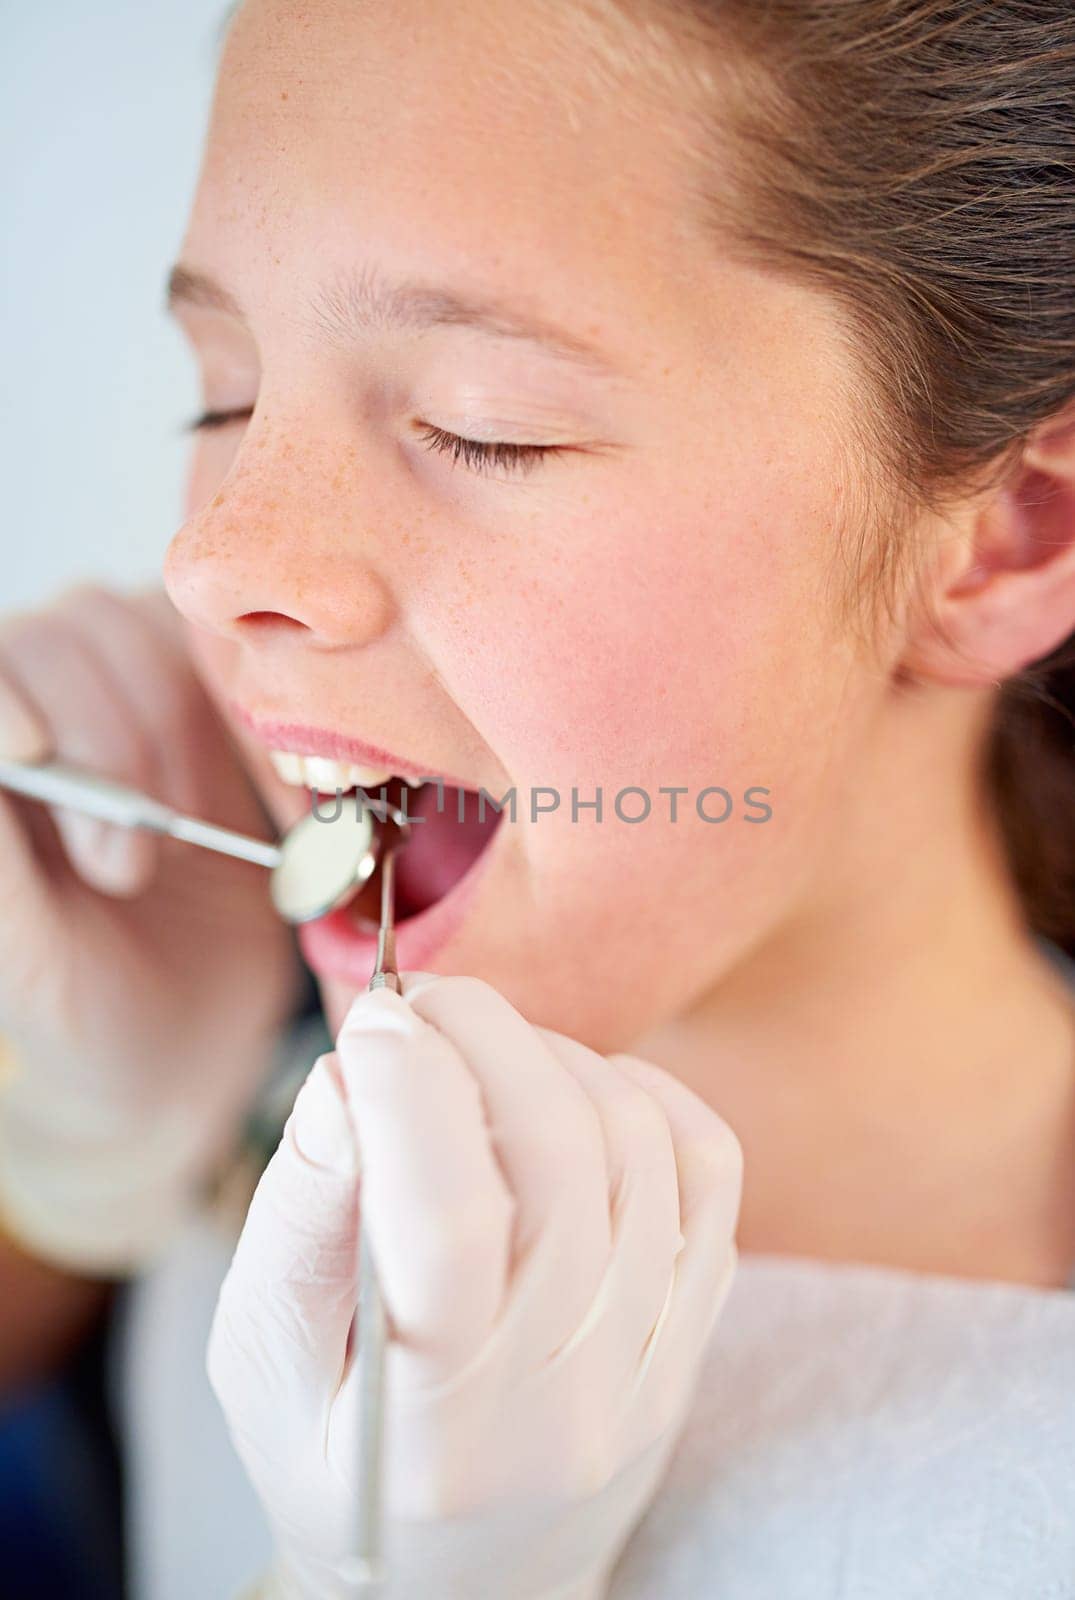 Dental, exam and girl and dentist with mirror zoom for tooth cavity or gum disease search. Oral care, tool or kid consulting specialist for teeth whitening, growth or bacteria, braces or development.